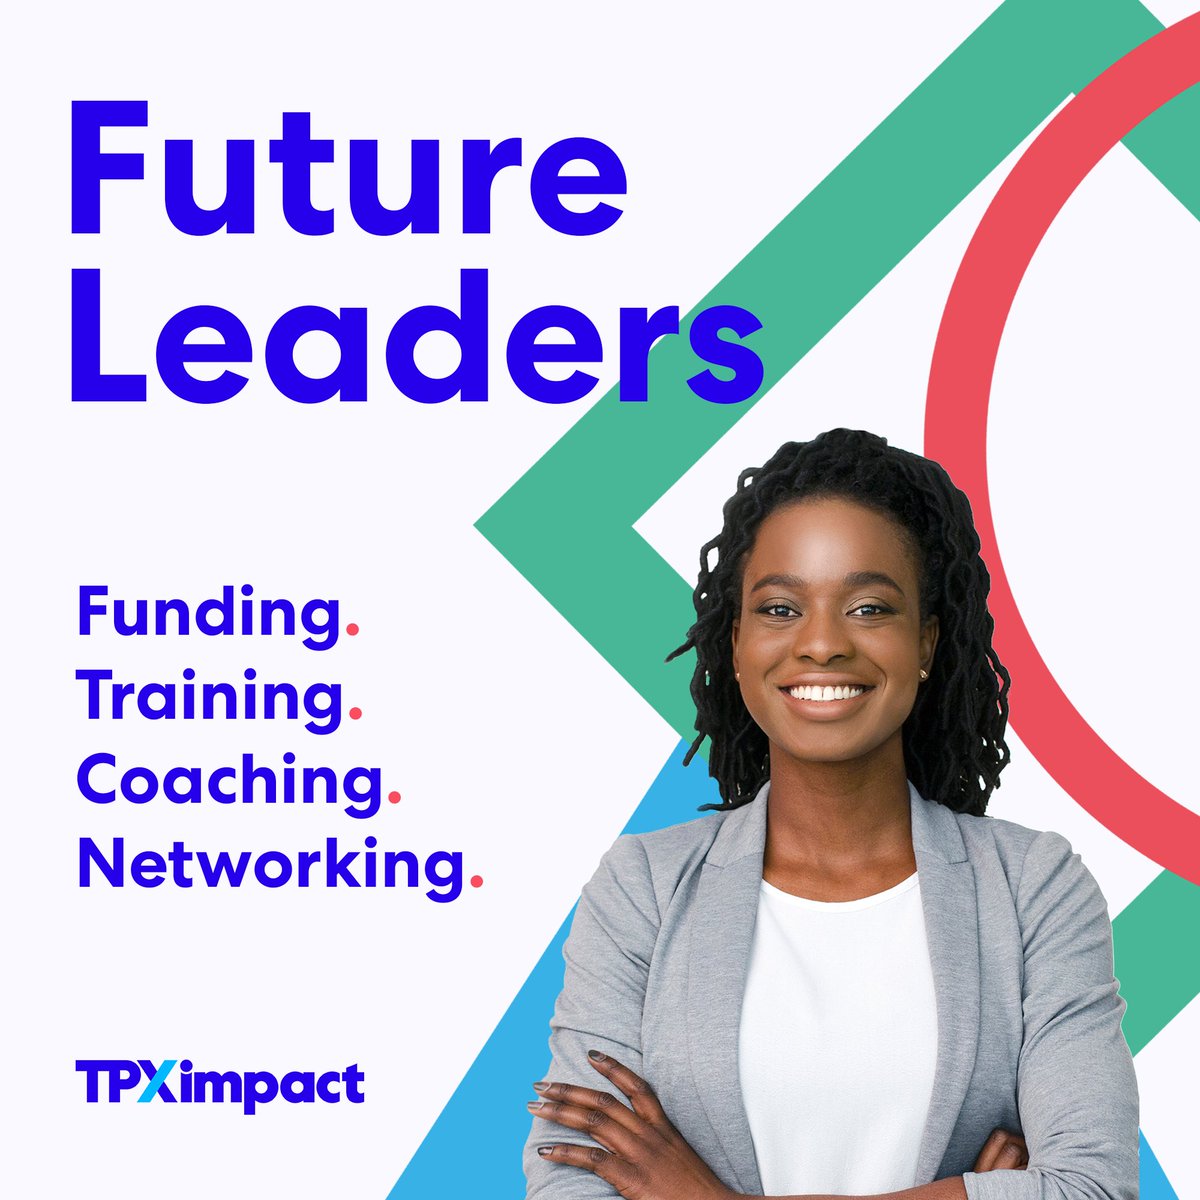 Calling Future Leaders (or know someone that is?) 📣 Aged between 21-30 & ready to dial up your product or service? Our future leaders programme has 6 months of 🎯 Funding 🎯 Training 🎯 Coaching 🎯 Networking You only have until the 20th May to apply tpximpact.com/future-leaders